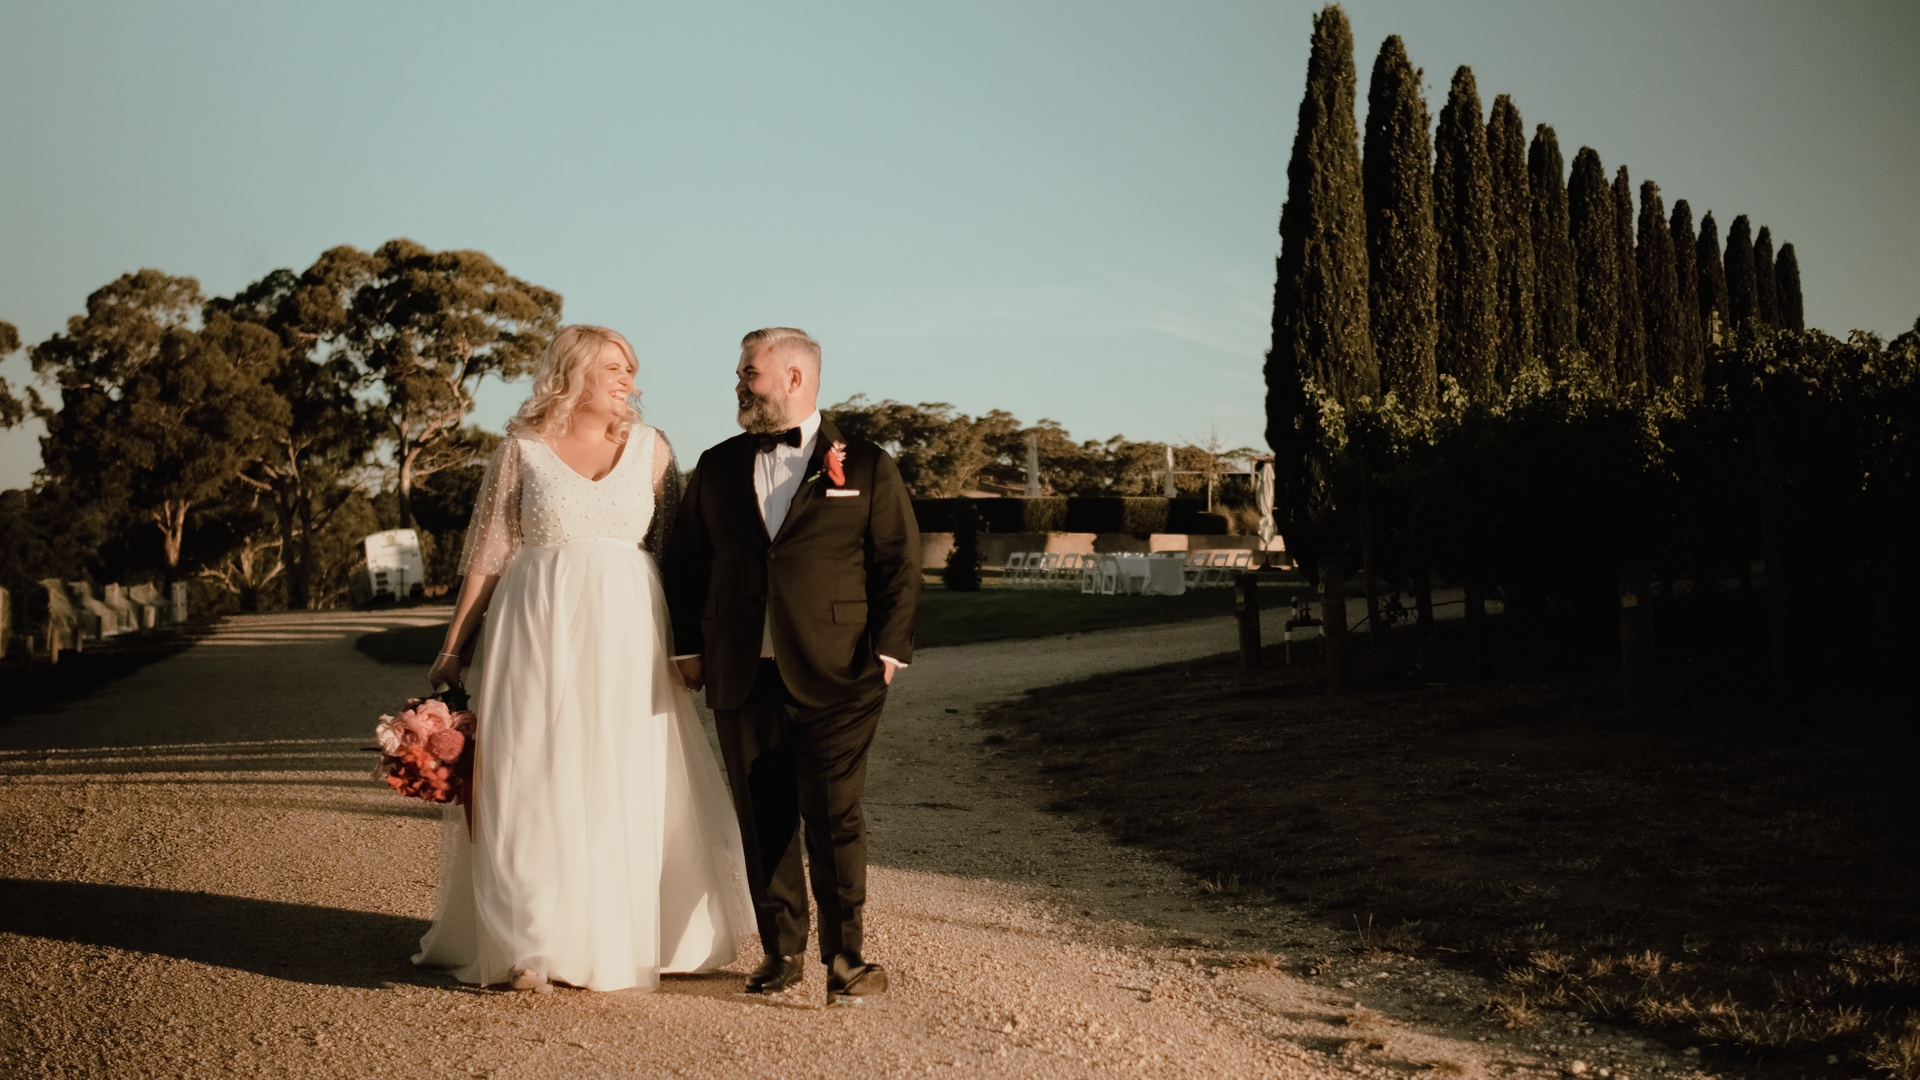 a bride and groom stroll down a driveway together at sunset, cyprus trees to their right at The Lane Vineyard